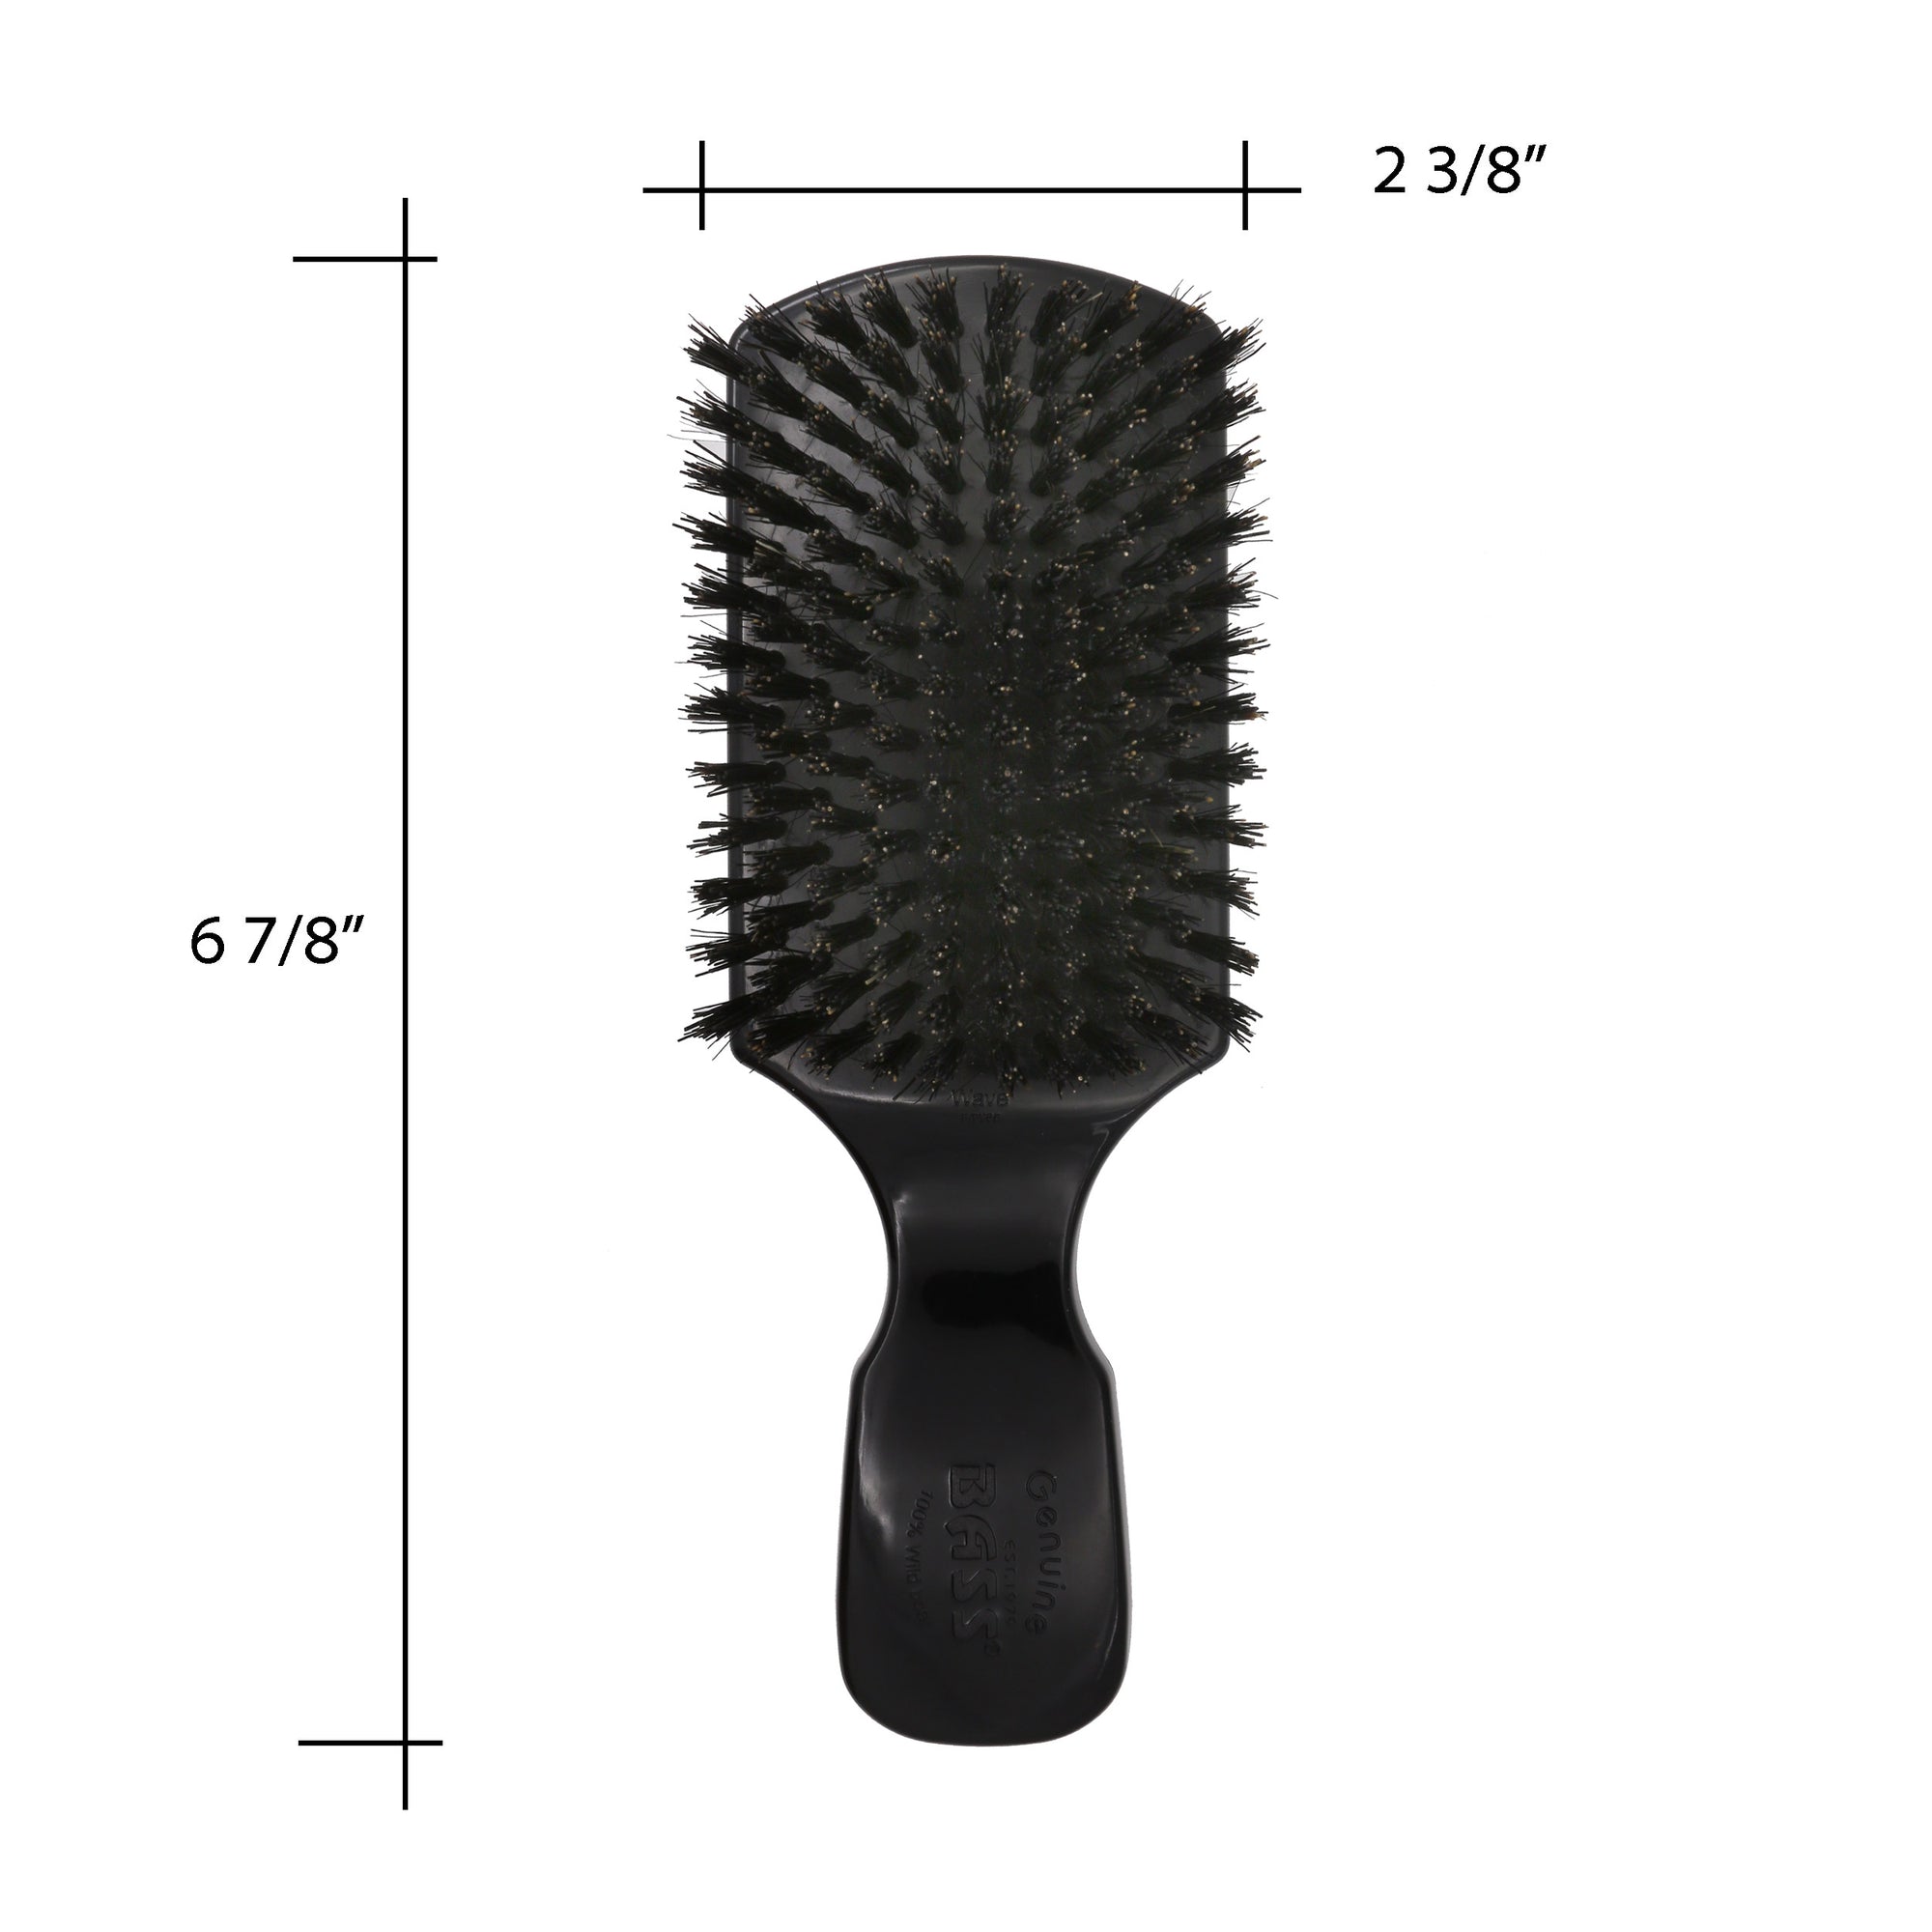 Black Club Style with Firm Natural Bristles